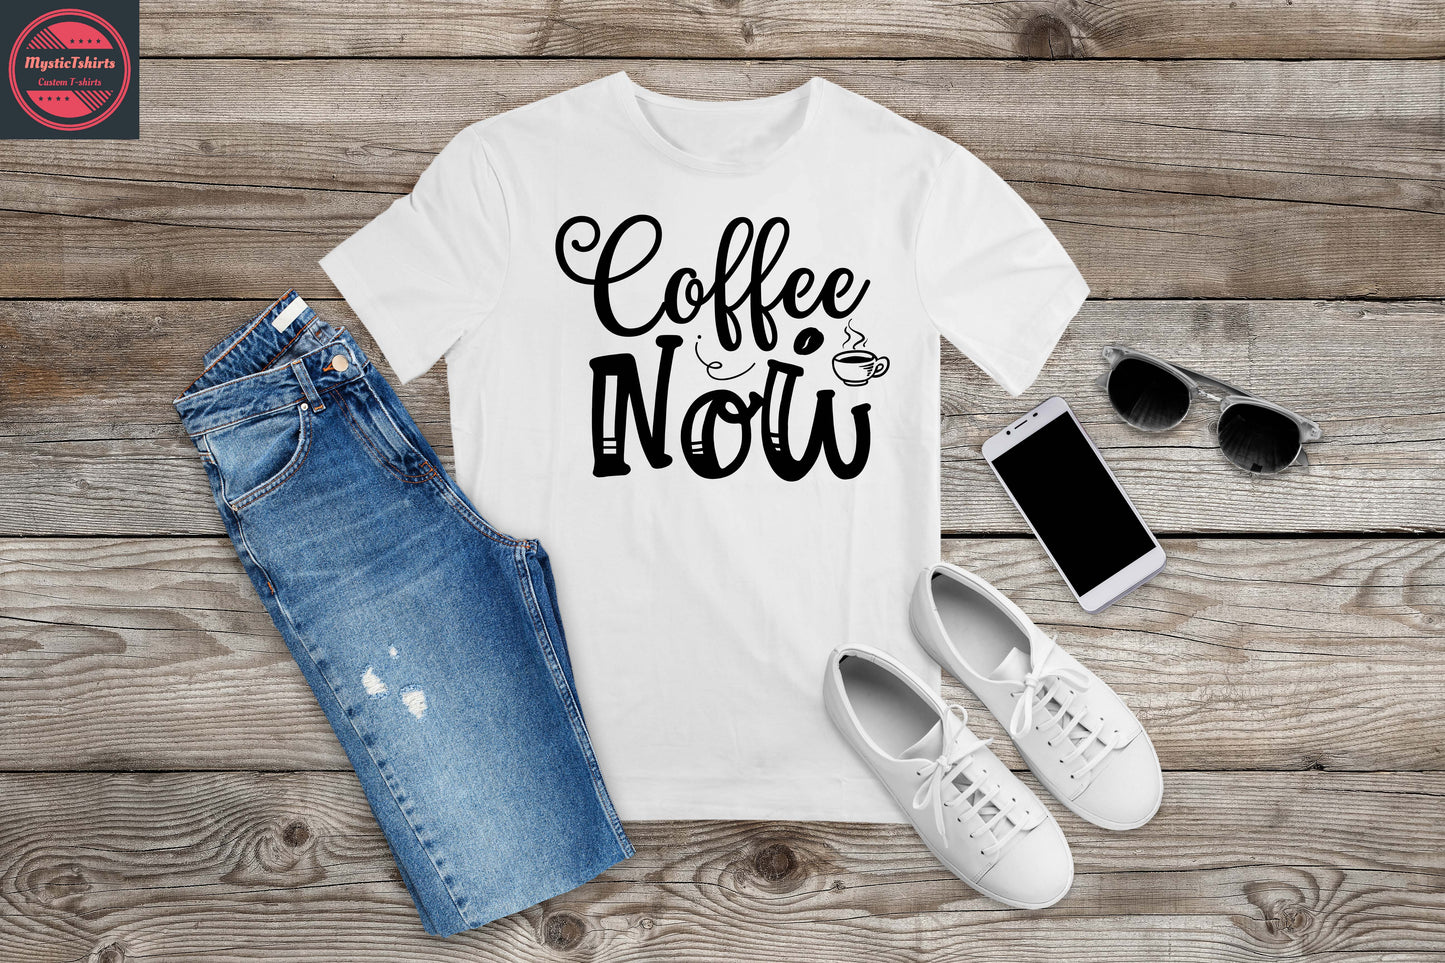 060. COFFEE NOW, Custom Made Shirt, Personalized T-Shirt, Custom Text, Make Your Own Shirt, Custom Tee